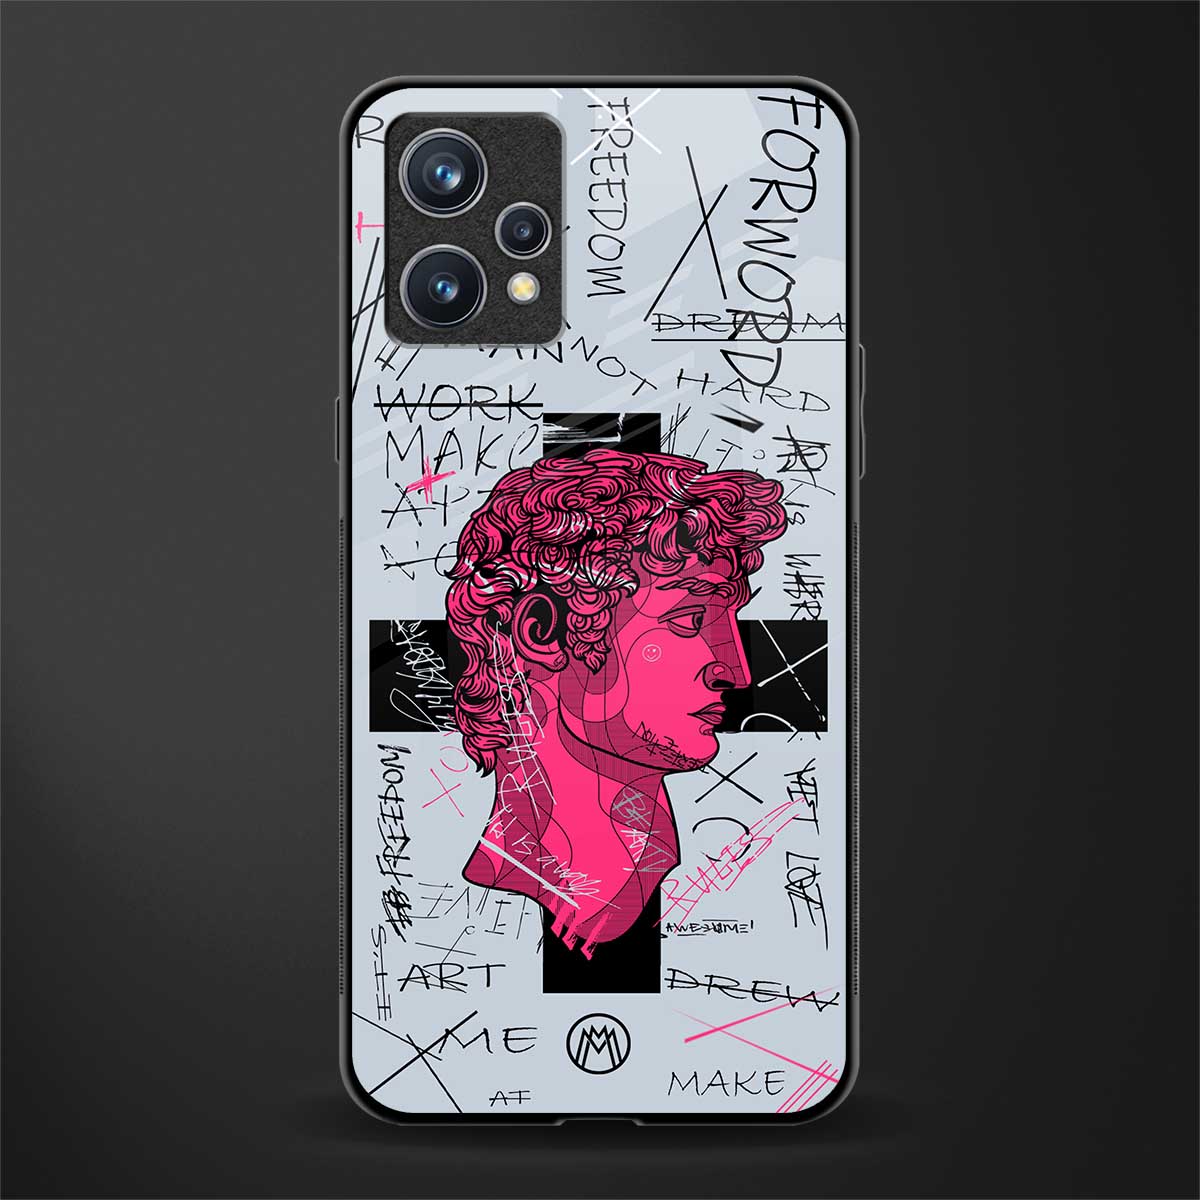 lost in reality david glass case for realme 9 pro plus 5g image